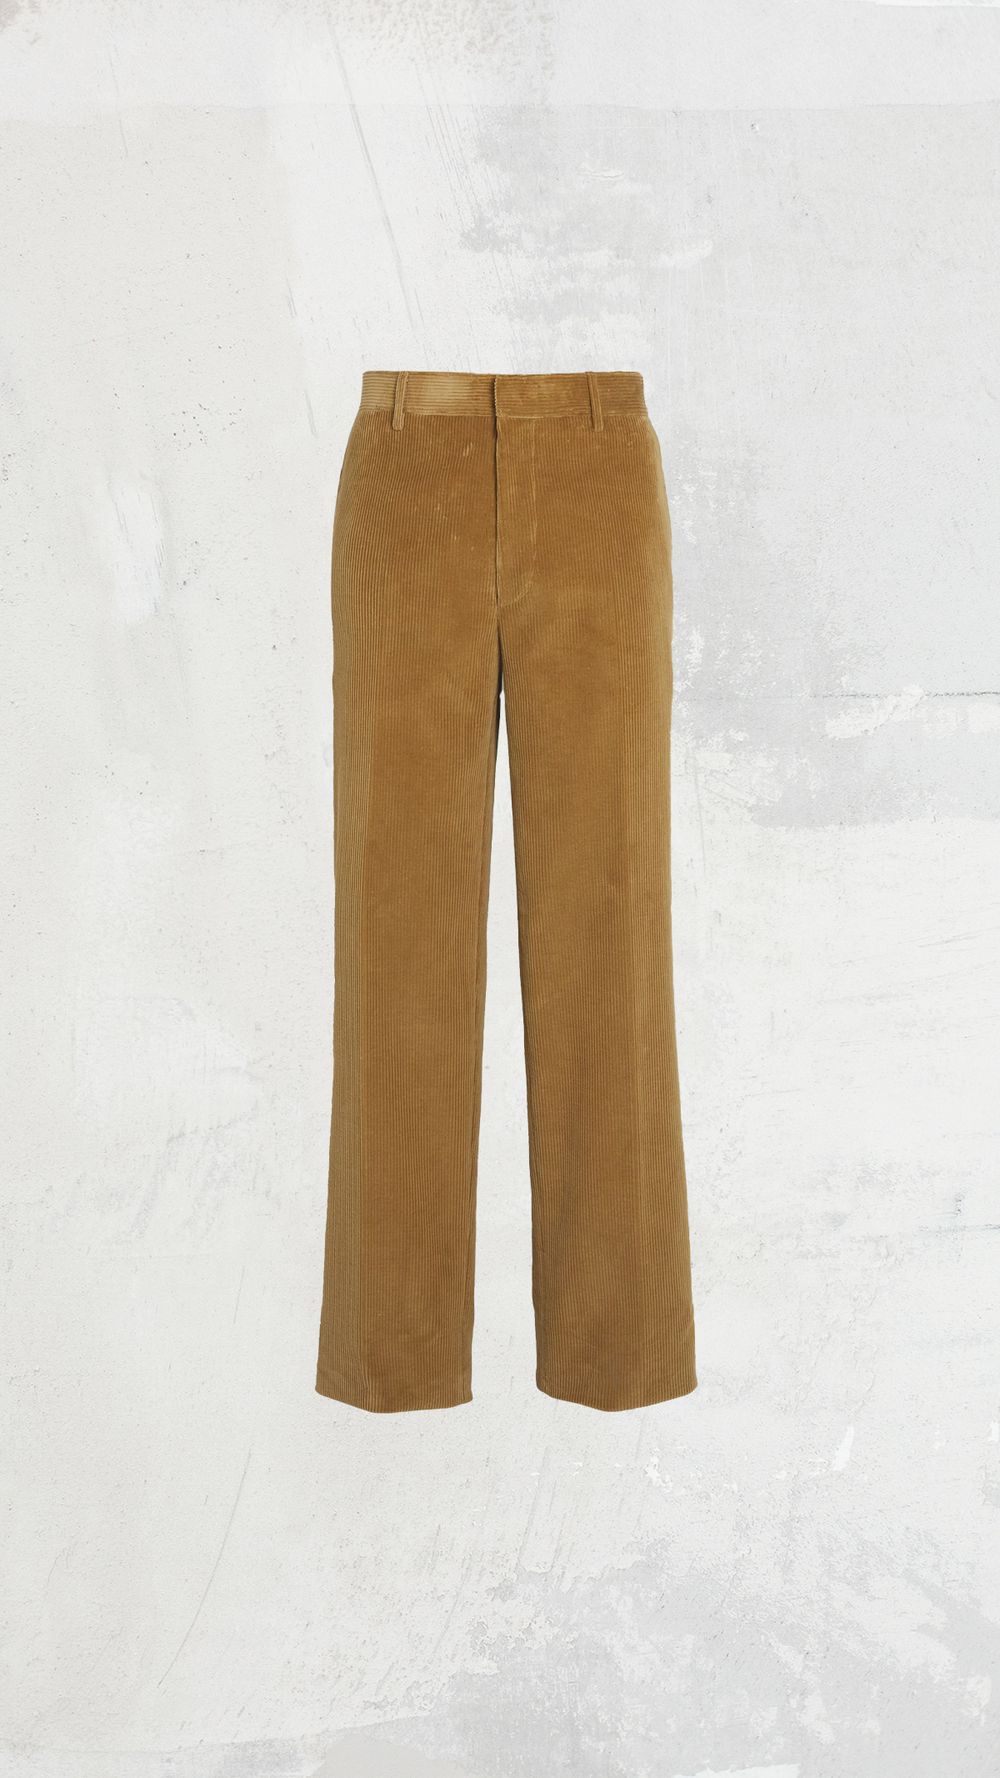 Fashion: Five Pairs Of Trousers To Upgrade Your Winter Wardrobe | The ...